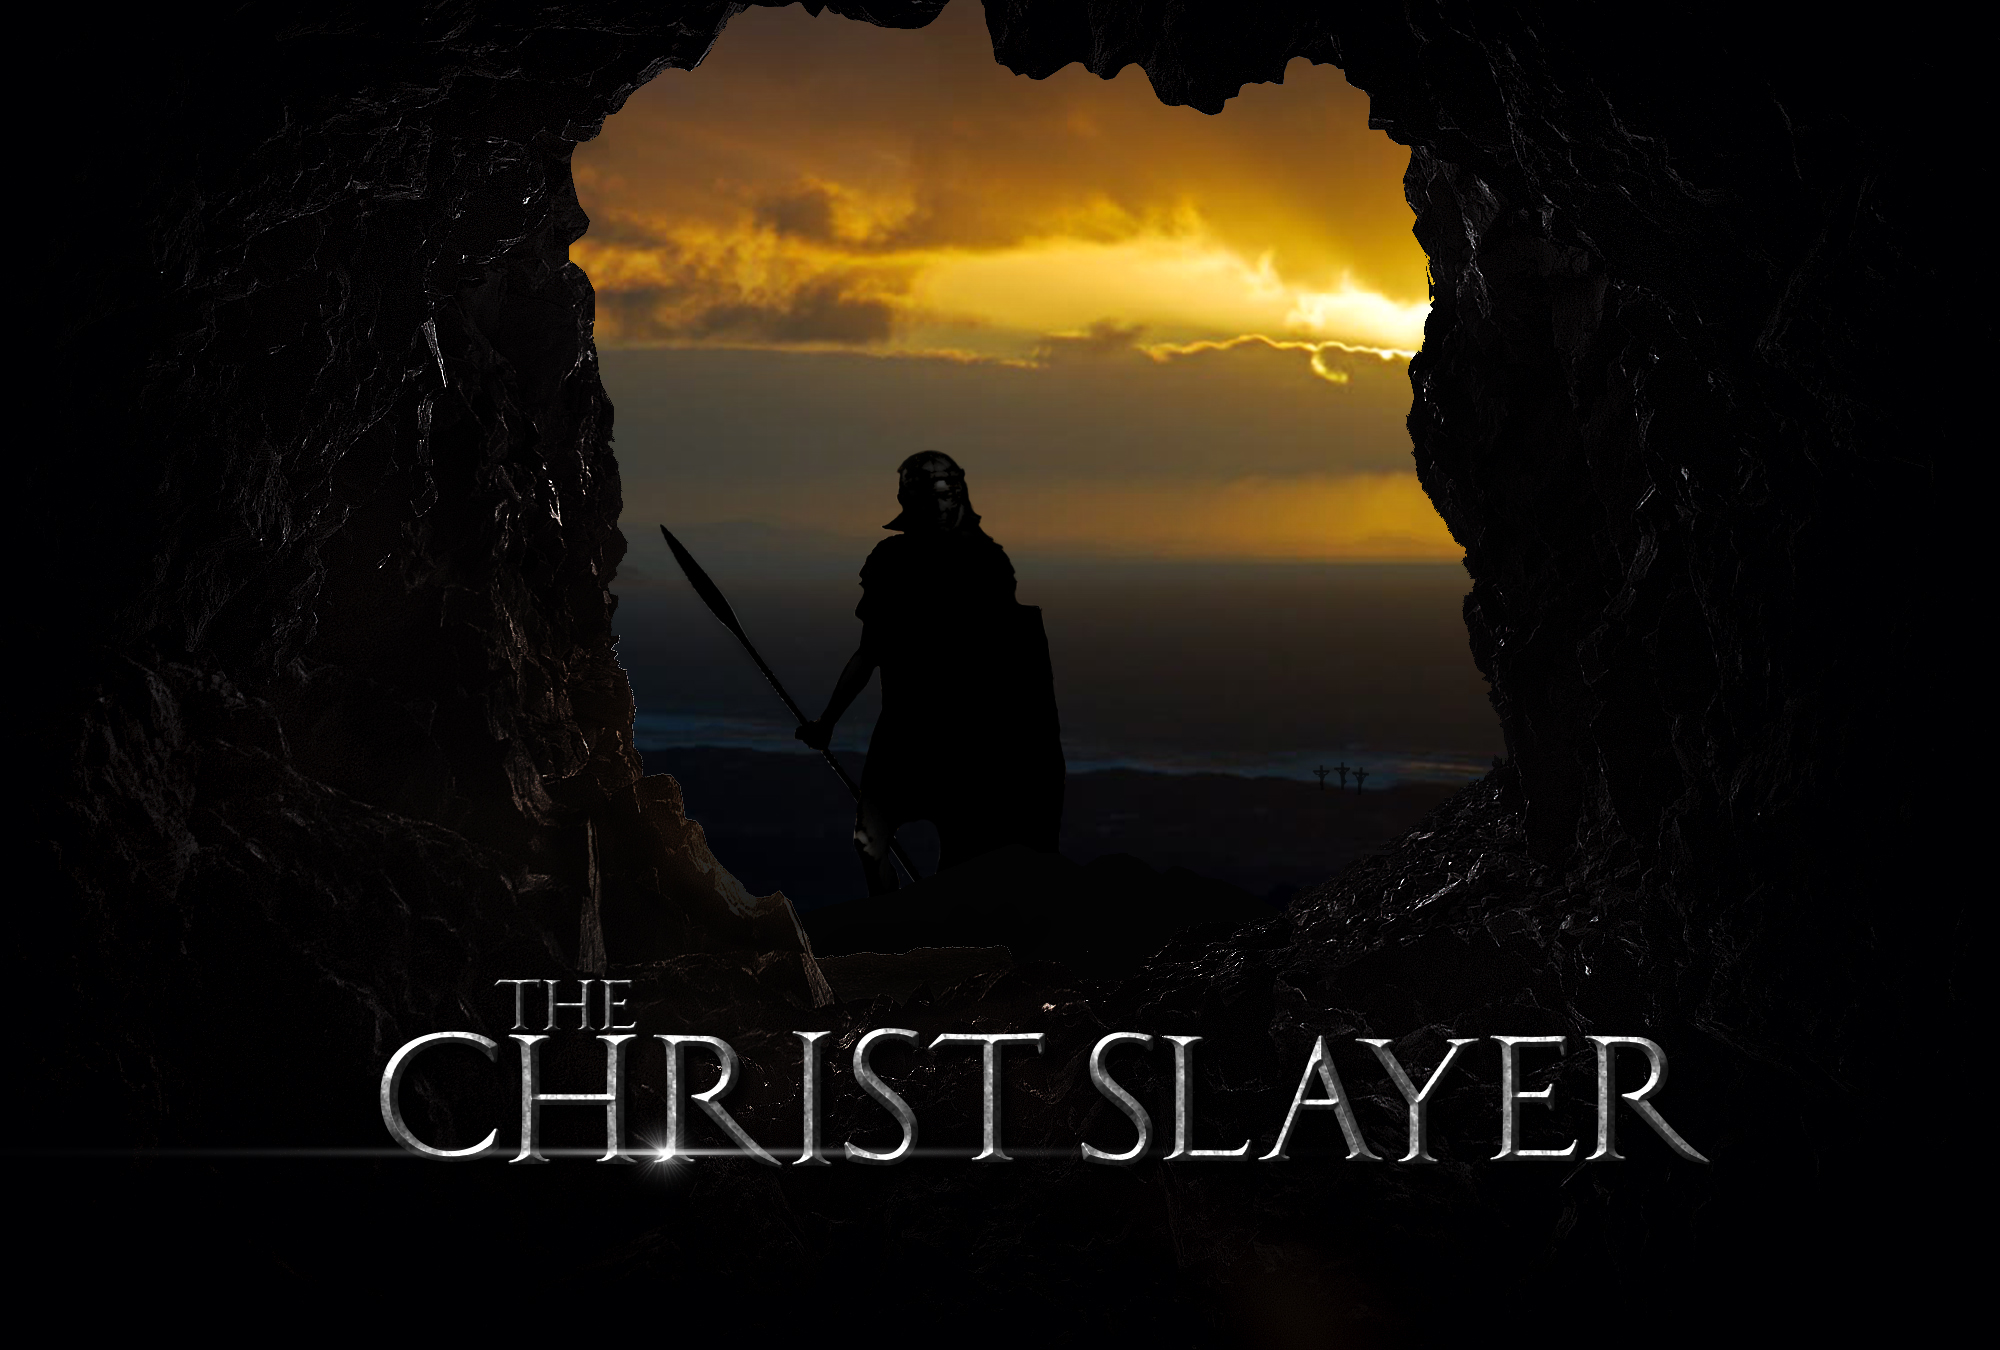 thechristslayer_yellow_rough